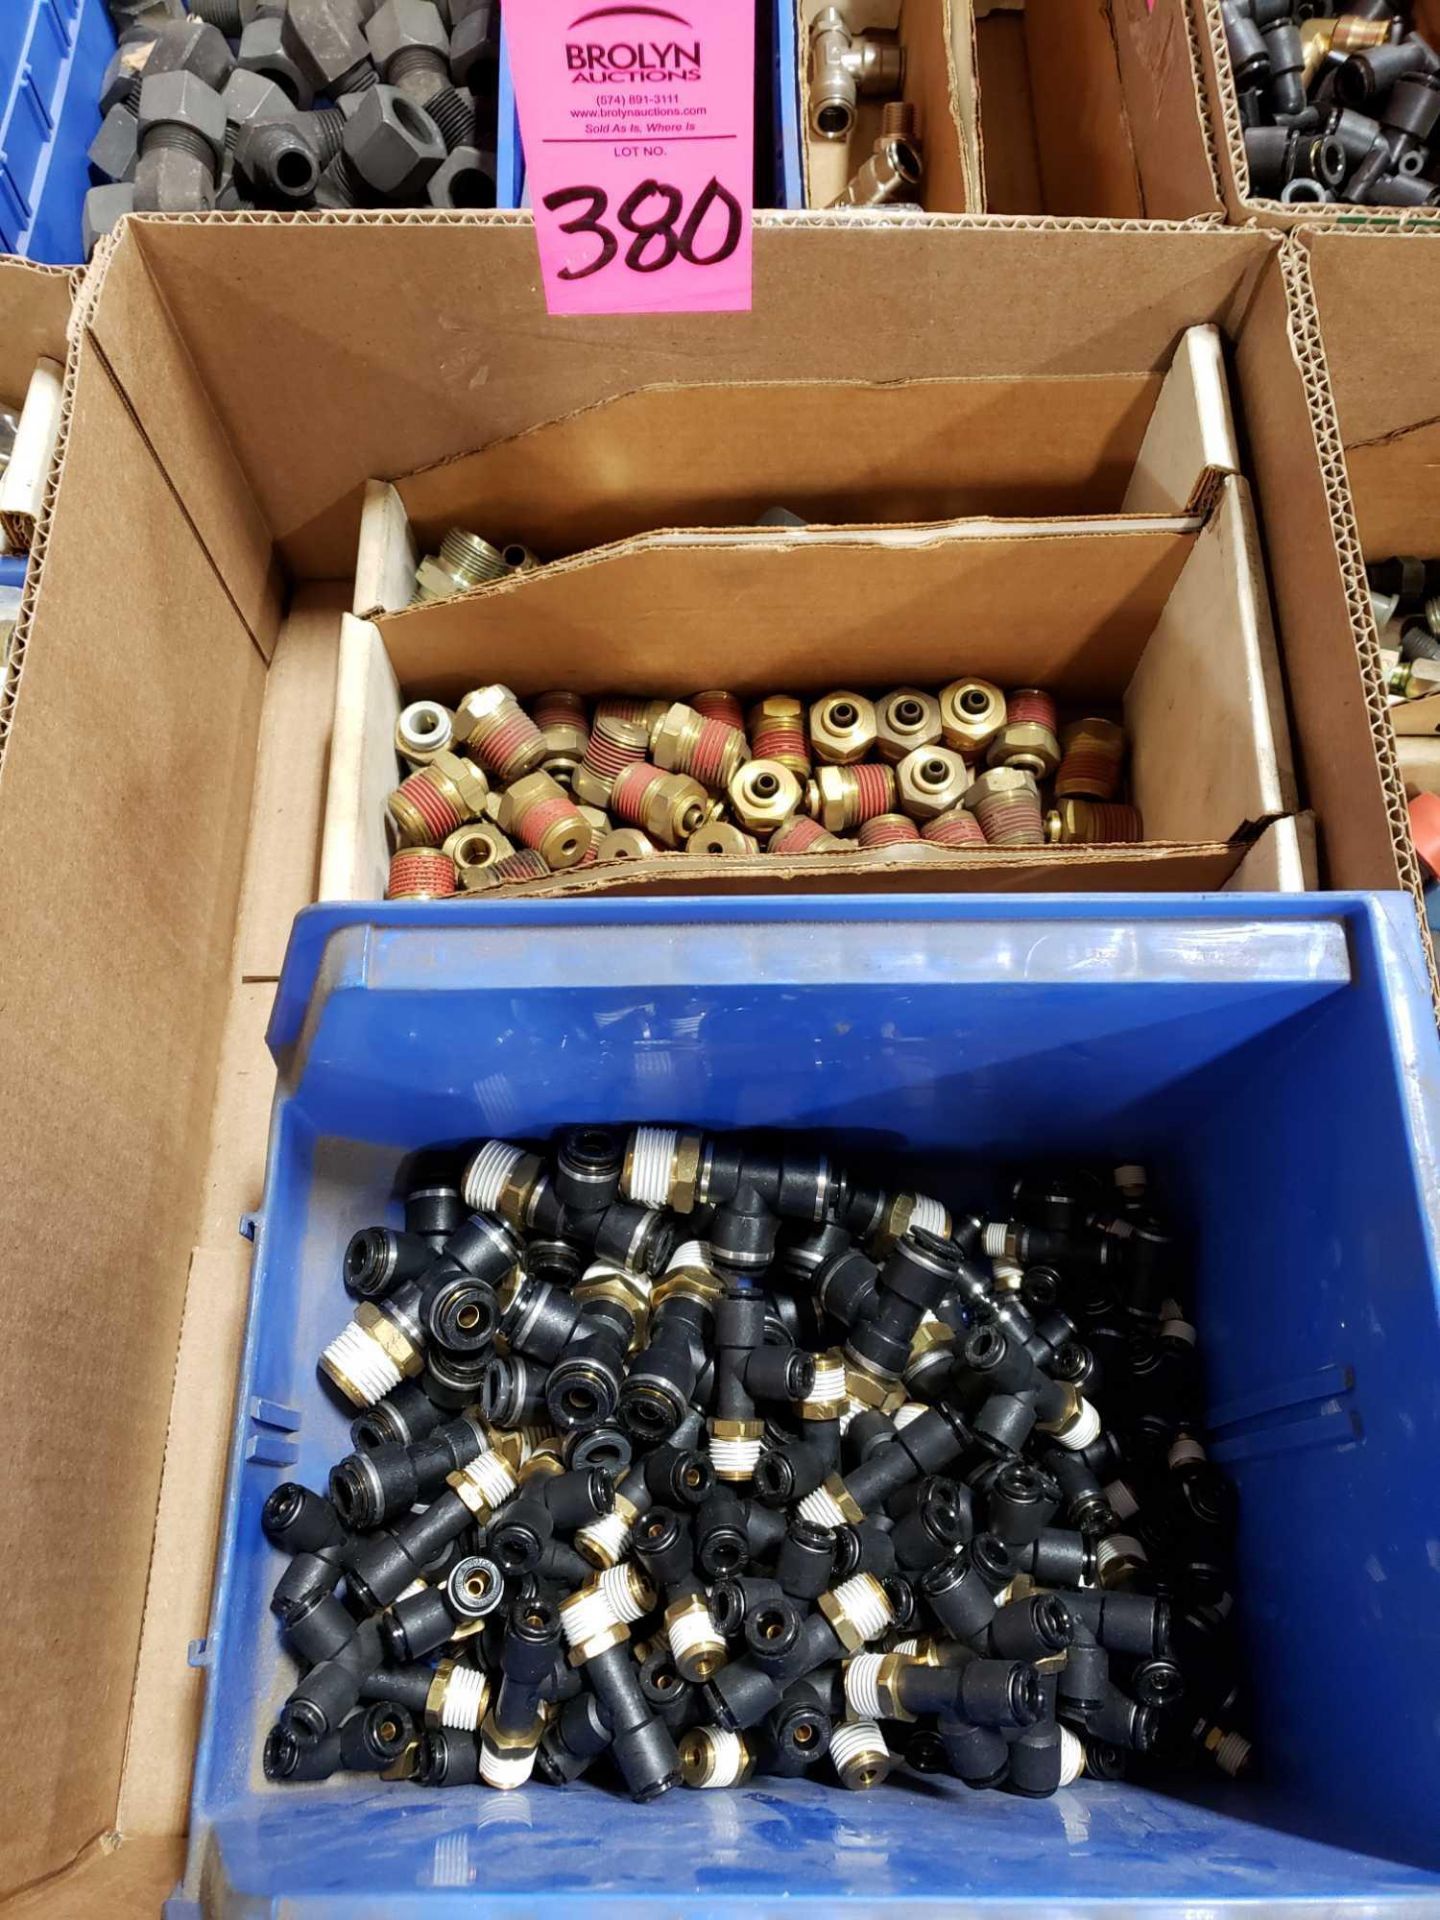 Lot of assorted hydraulic and pneumatic fittings. Some brass. New as pictured.